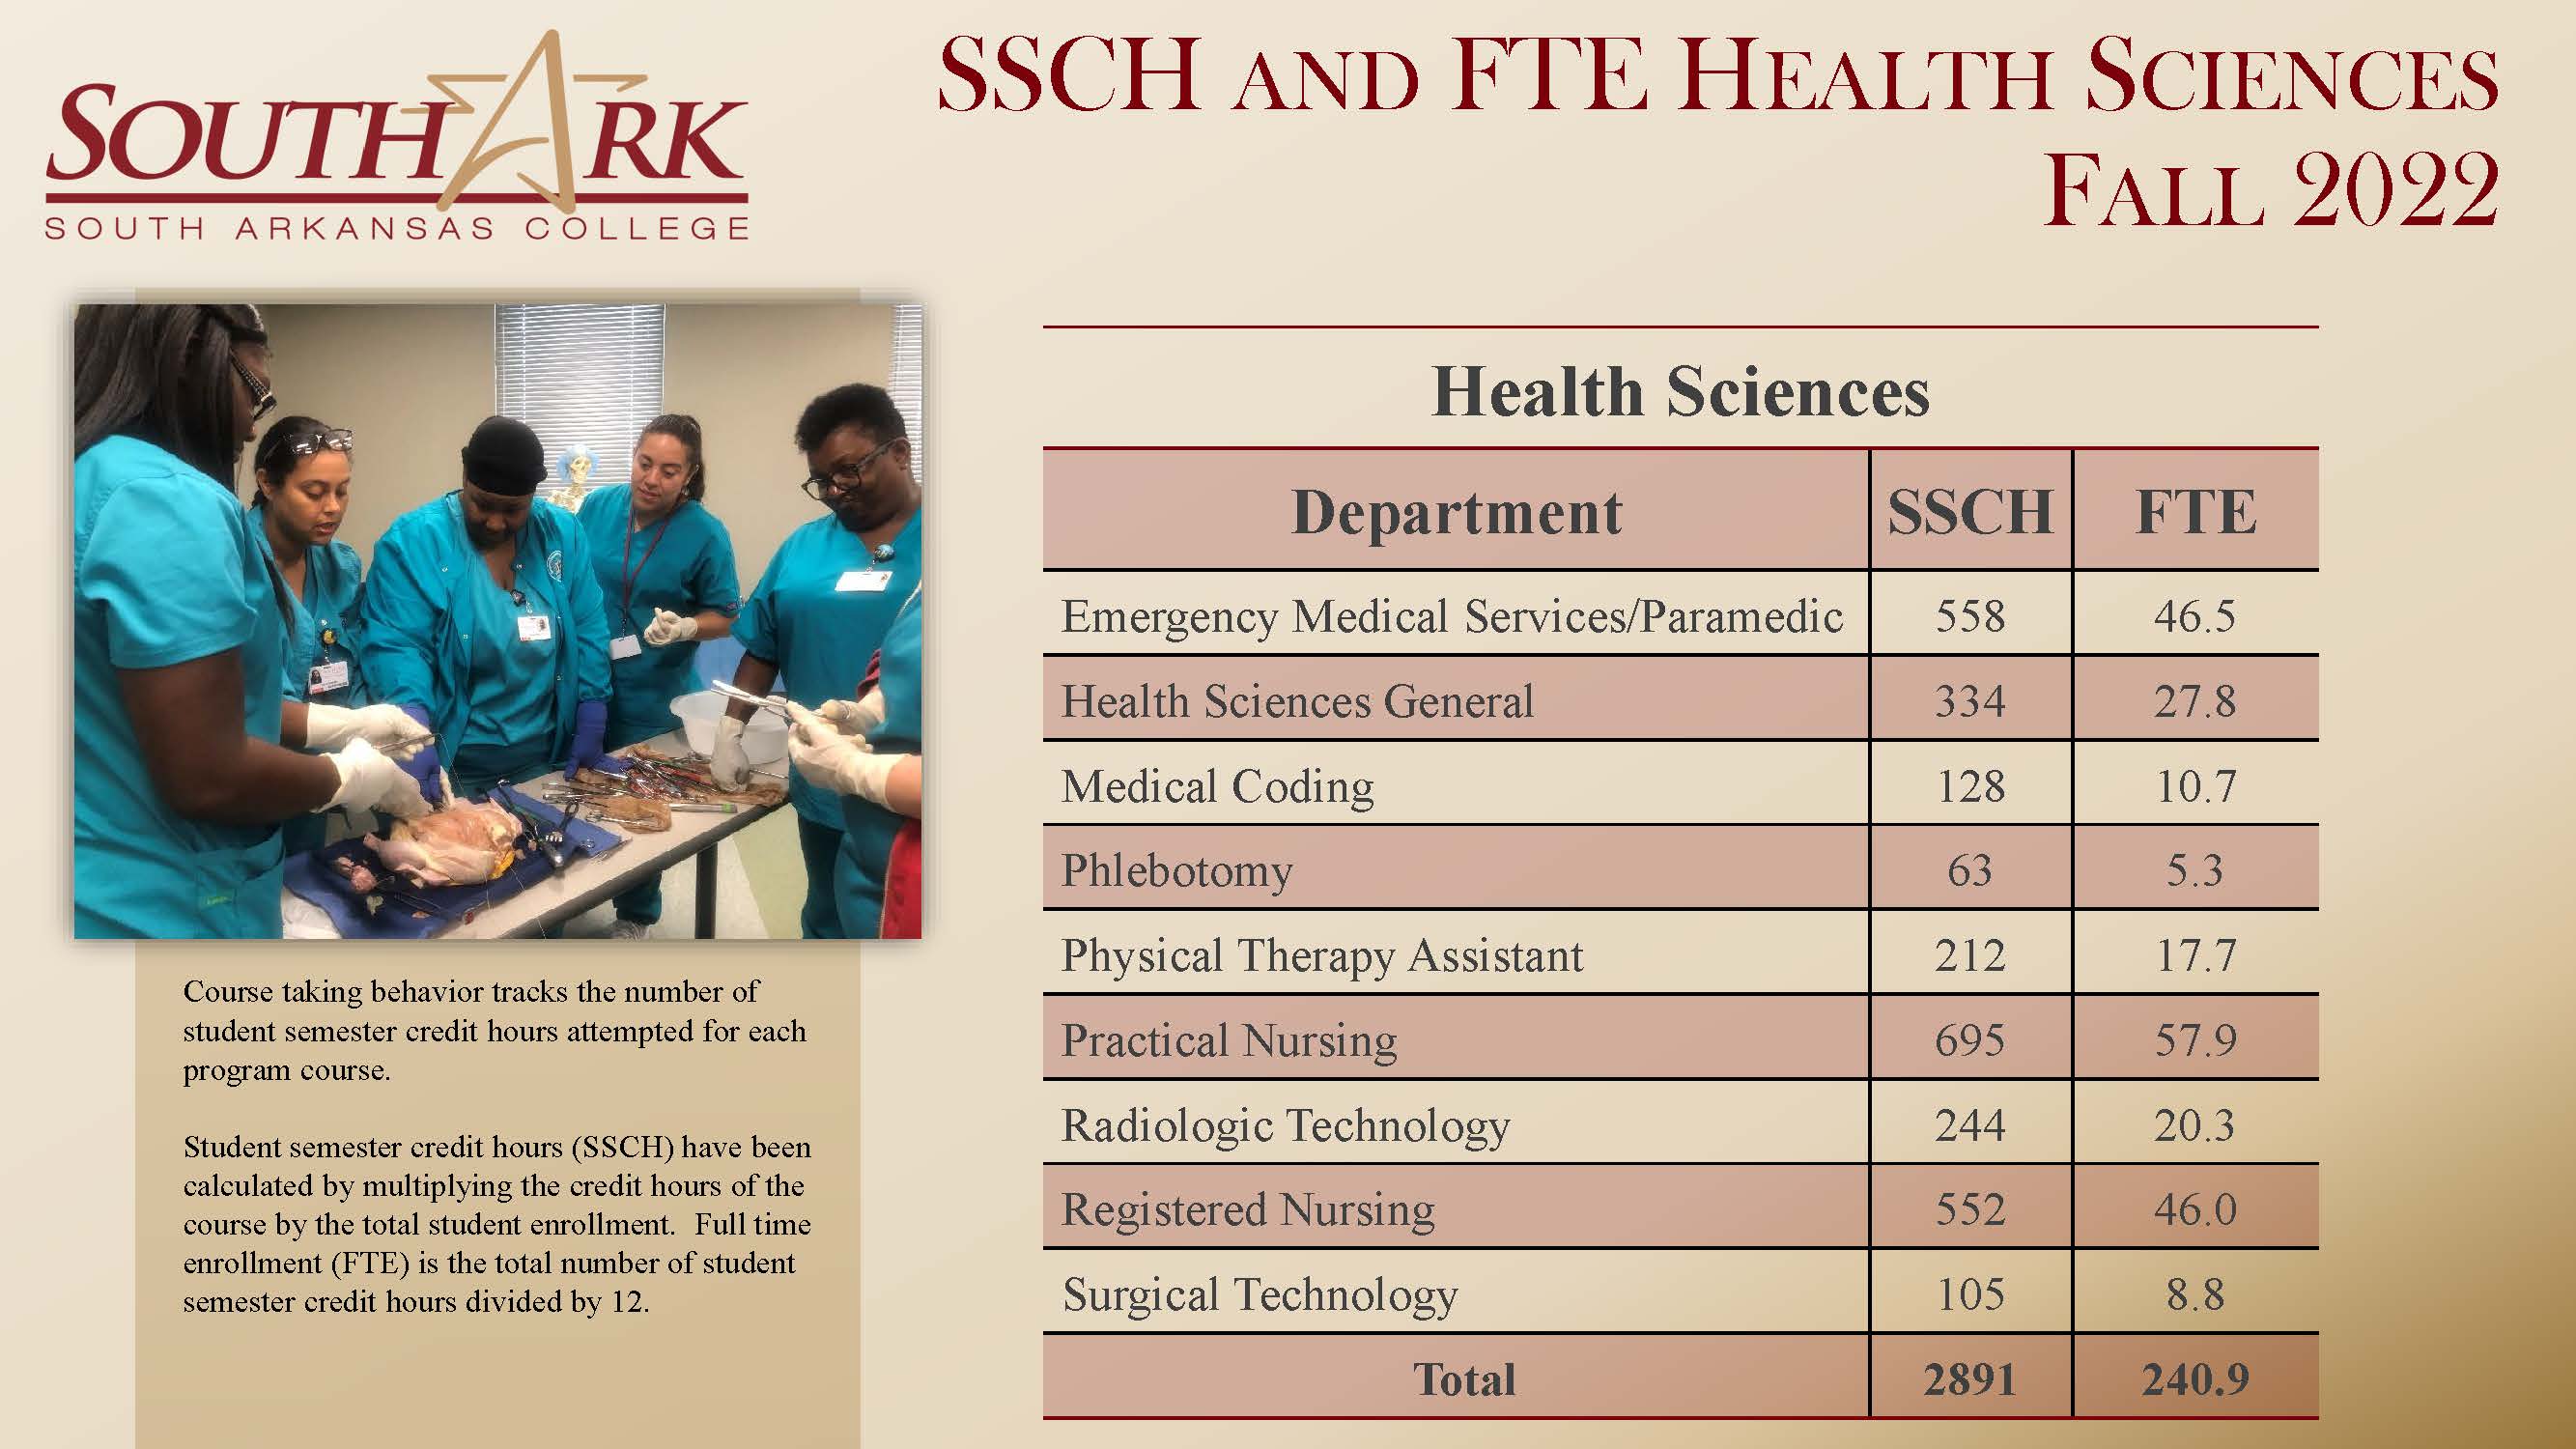 SSCH / FTE for  Health Sciences Fall 2022